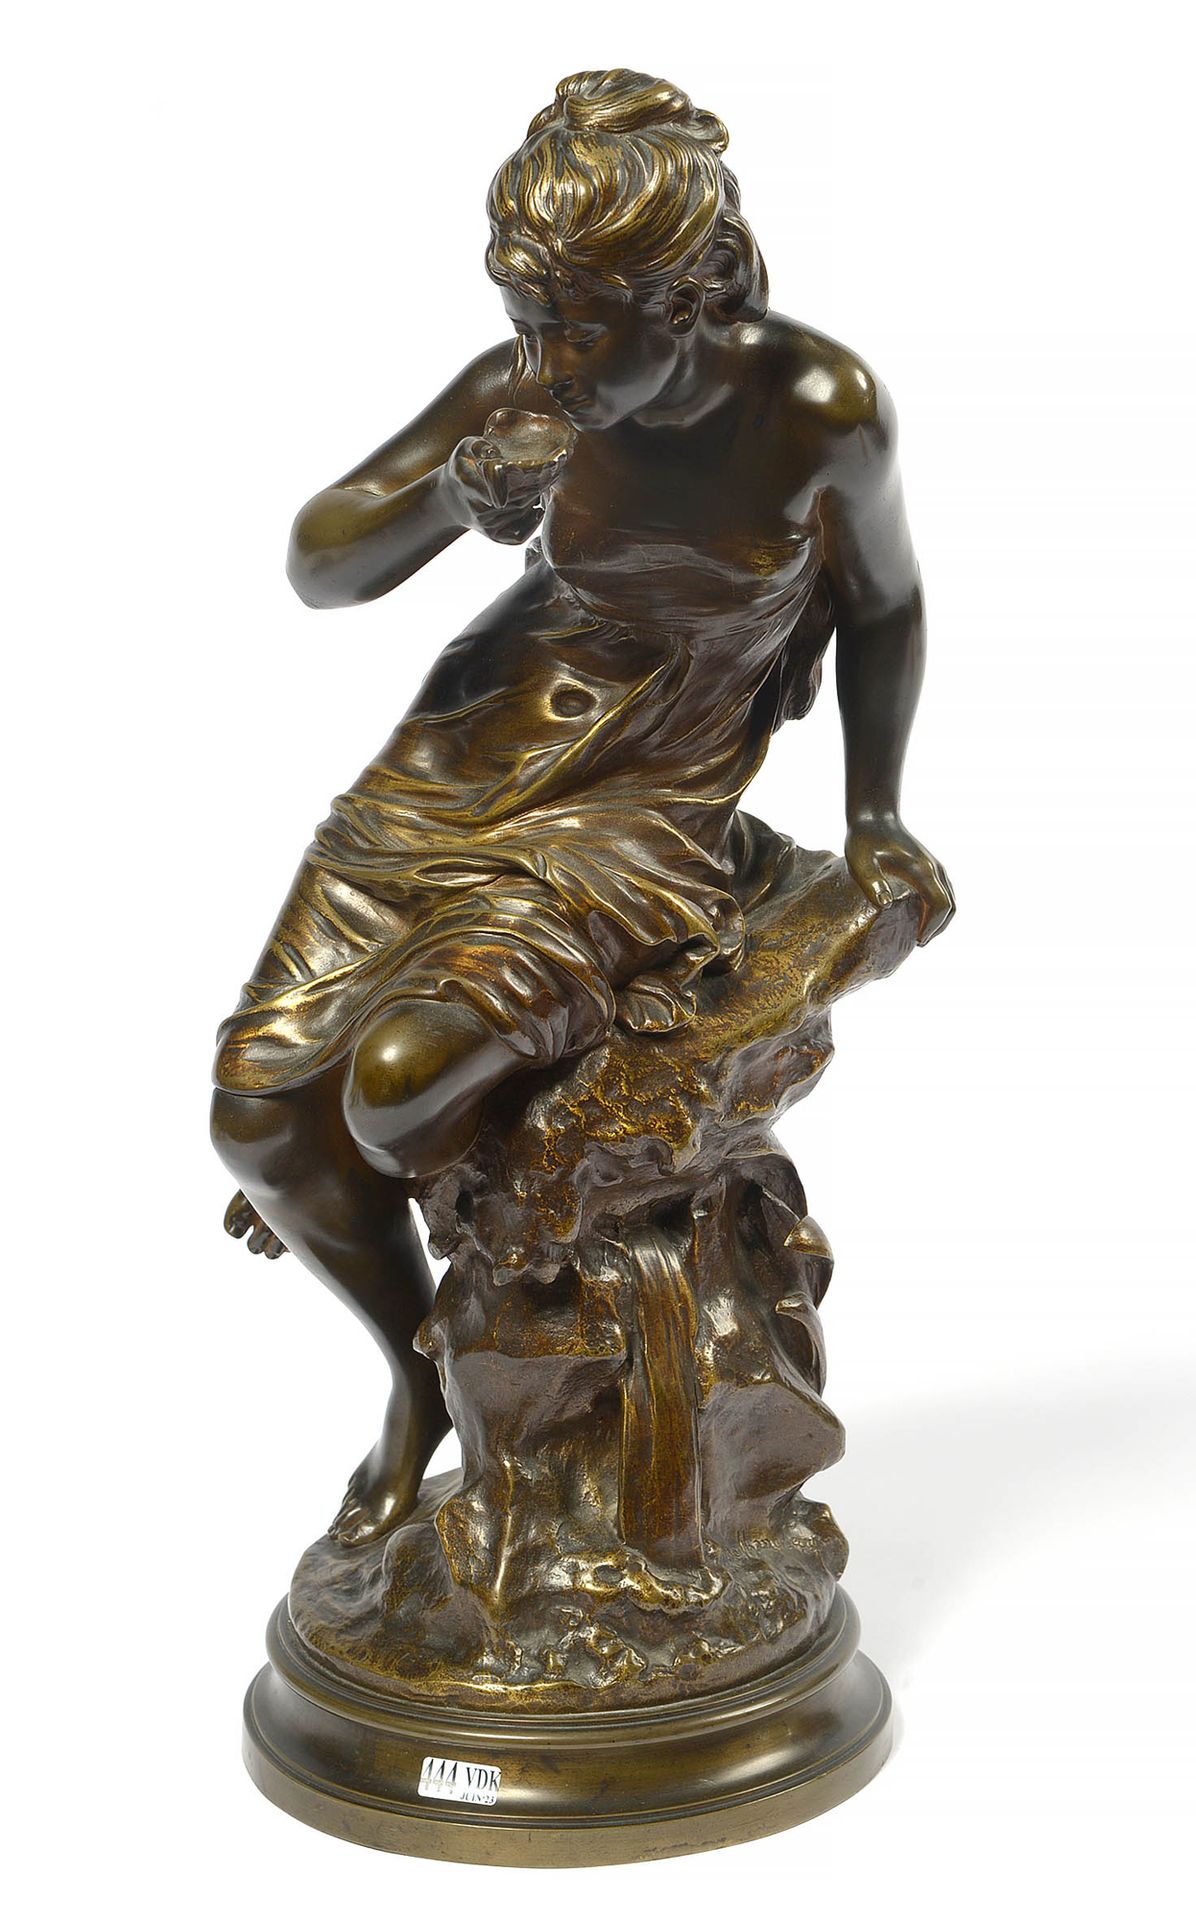 MOREAU Mathurin (1822 - 1912) "La source" in bronze with brown - gilded patina. &hellip;